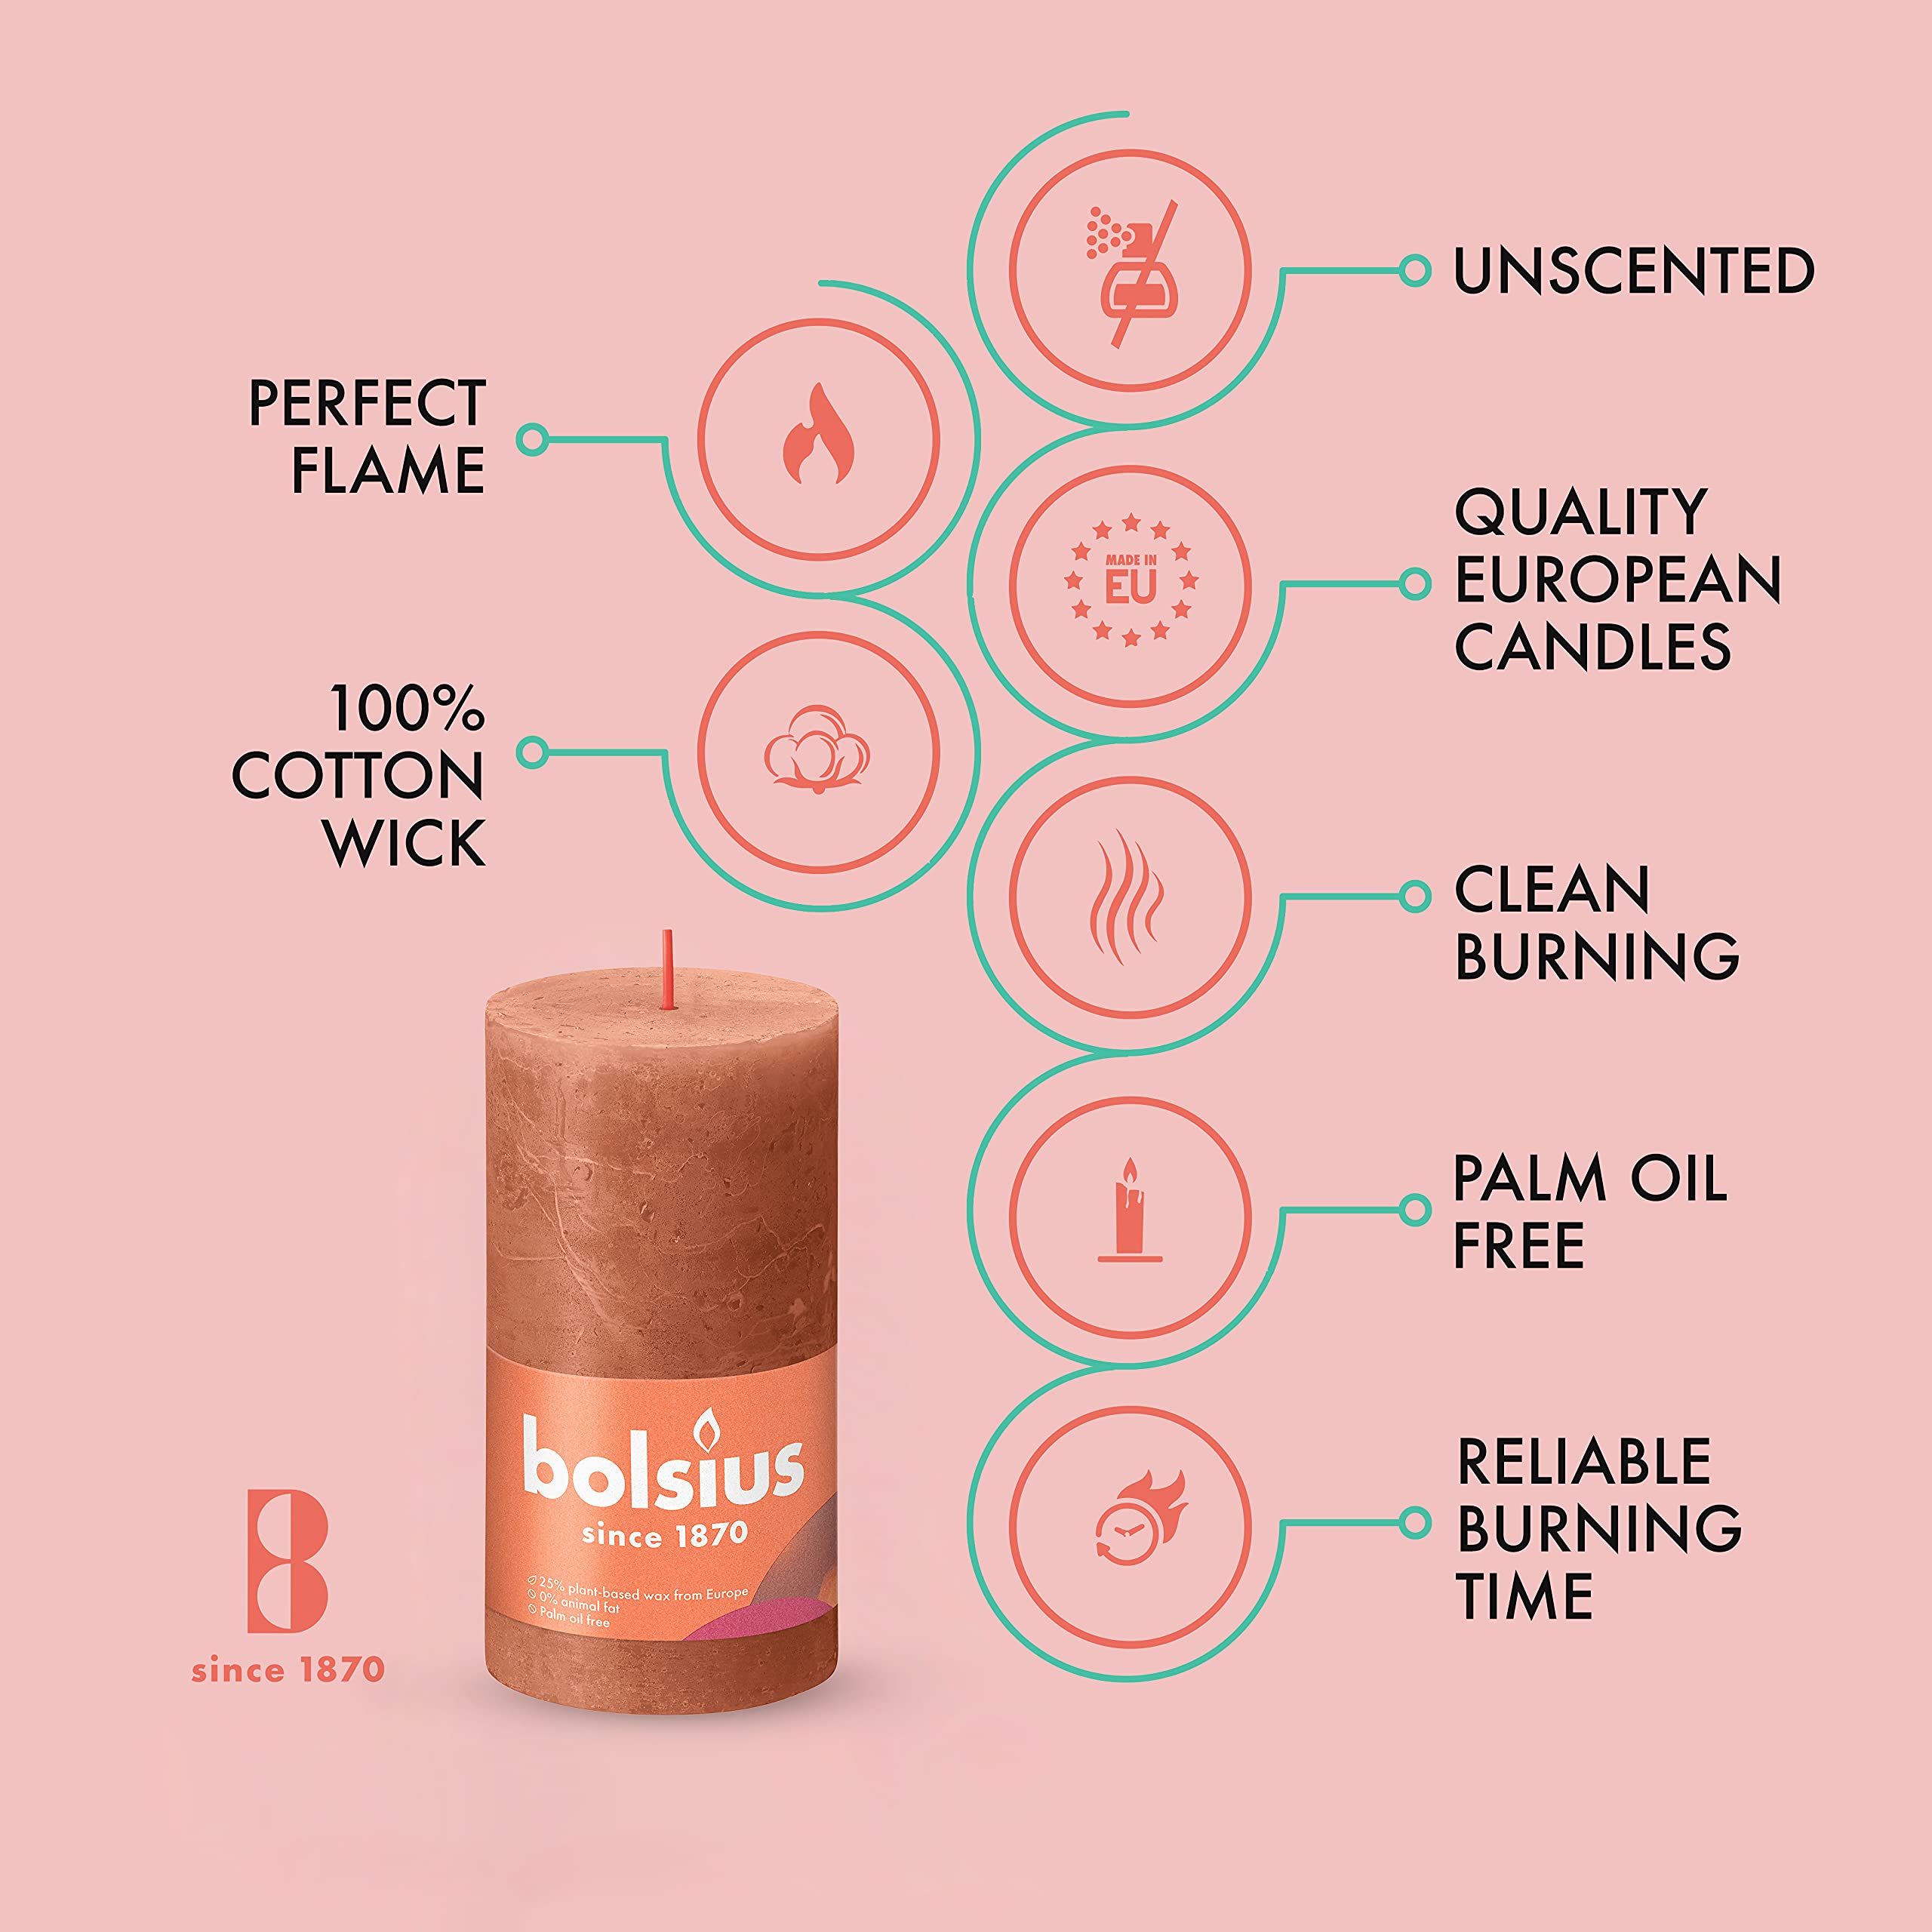 BOLSIUS 4 Pack Rusty Pink Rustic Pillar Candles - 2 X 4 Inches - Premium European Quality - Includes Natural Plant-Based Wax - Unscented Dripless Smokeless 30 Hour Party D�cor and Wedding Candles  - Good